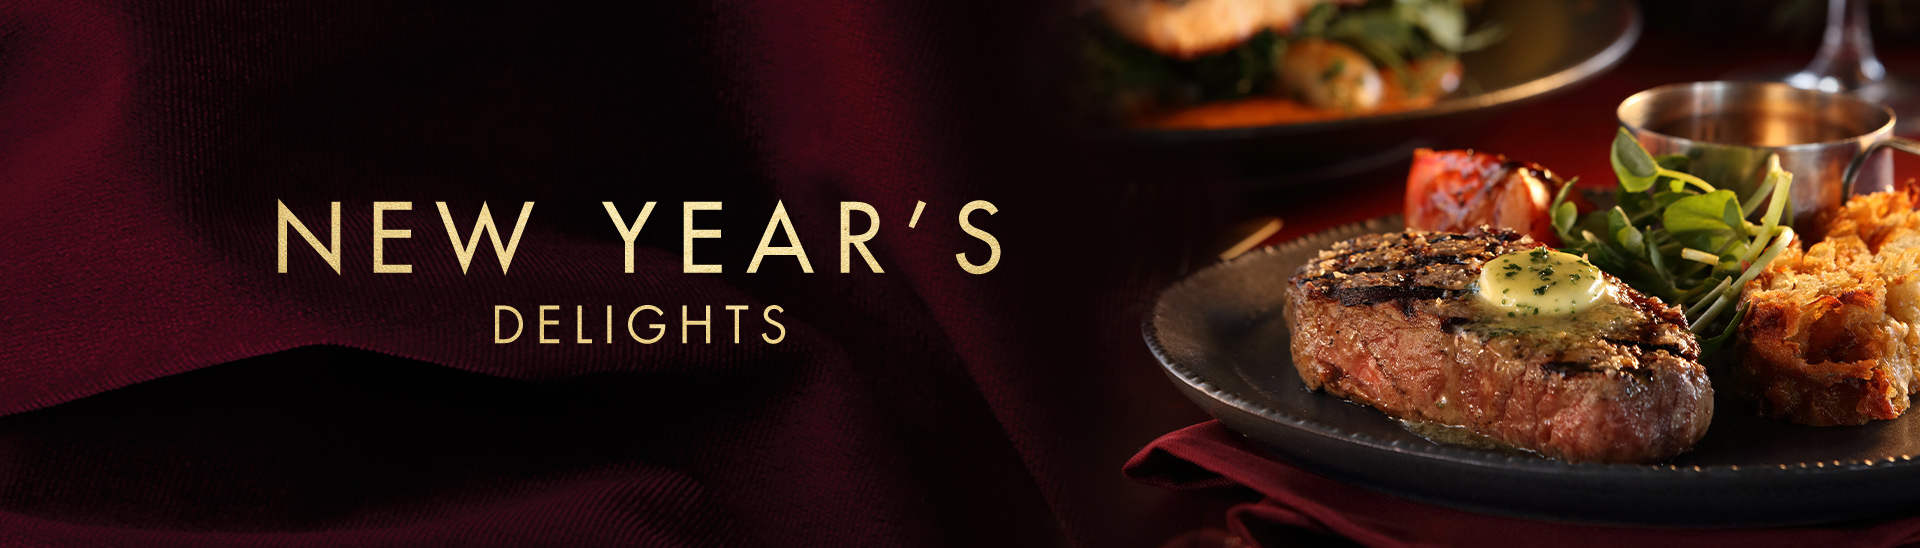 New Year’s Eve 2019 at Miller & Carter Rayleigh